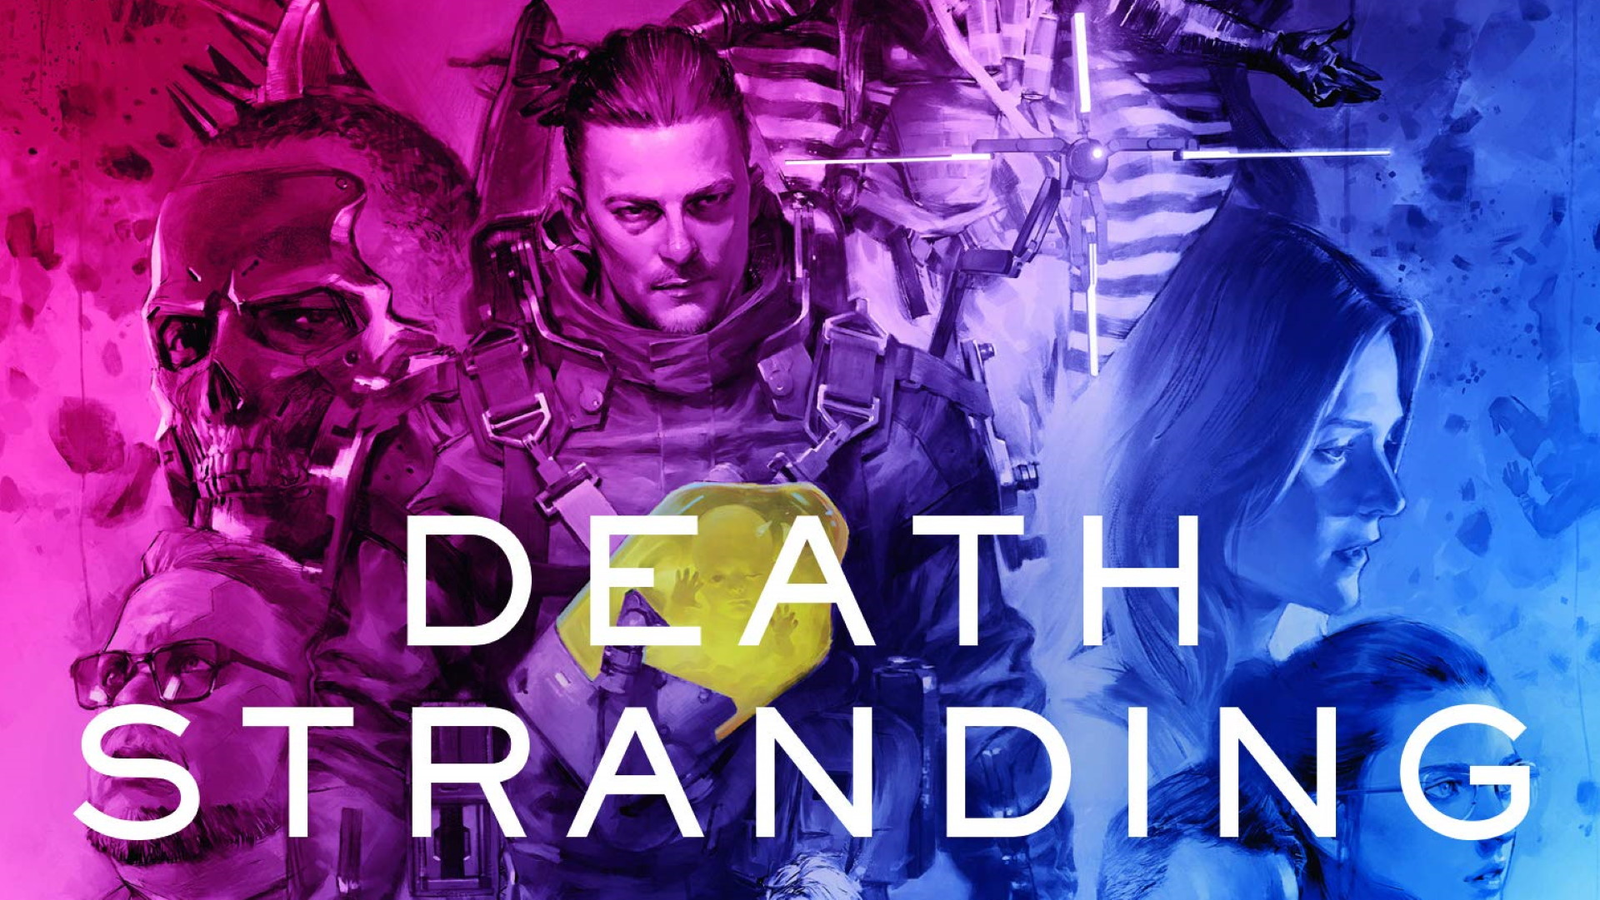 Thousands of Bad Death Stranding User Ratings Removed From